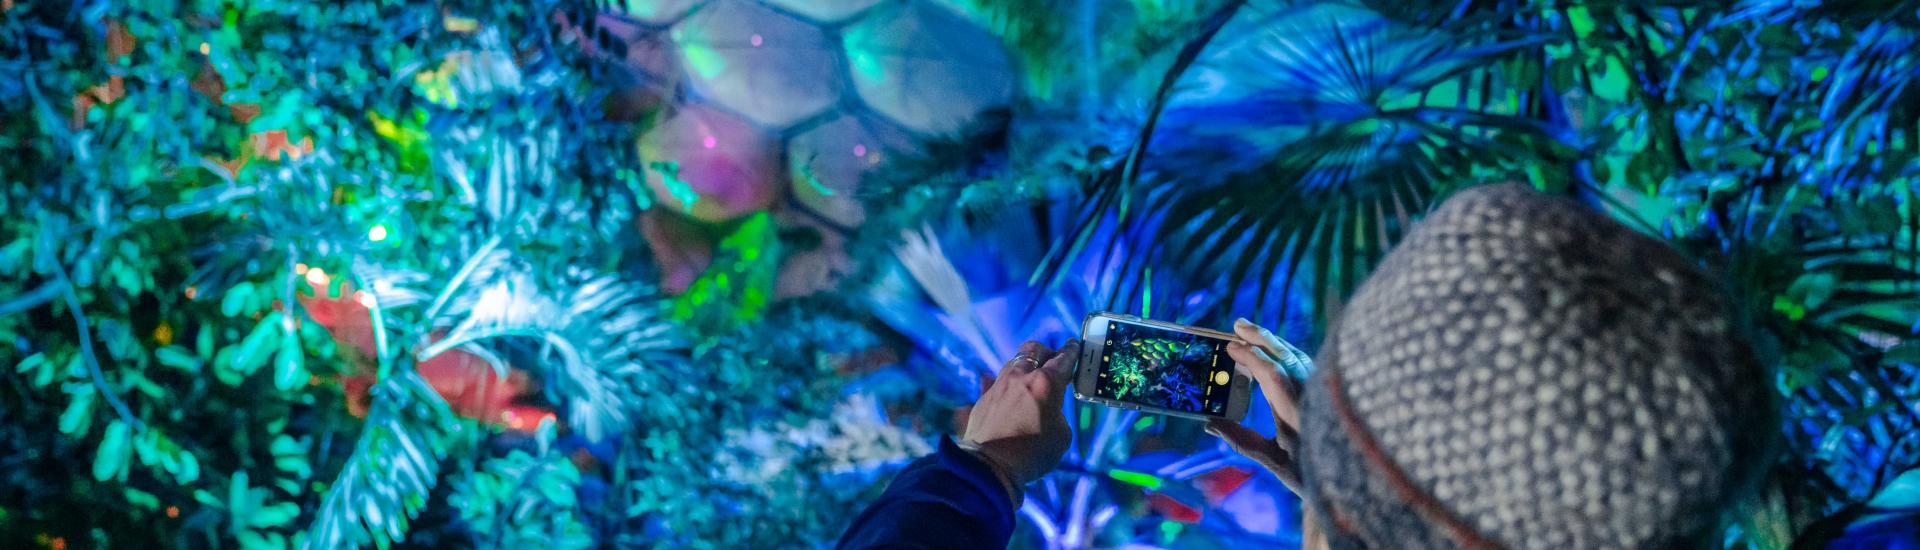 Person taking photo in Rainforest Biome at Christmas